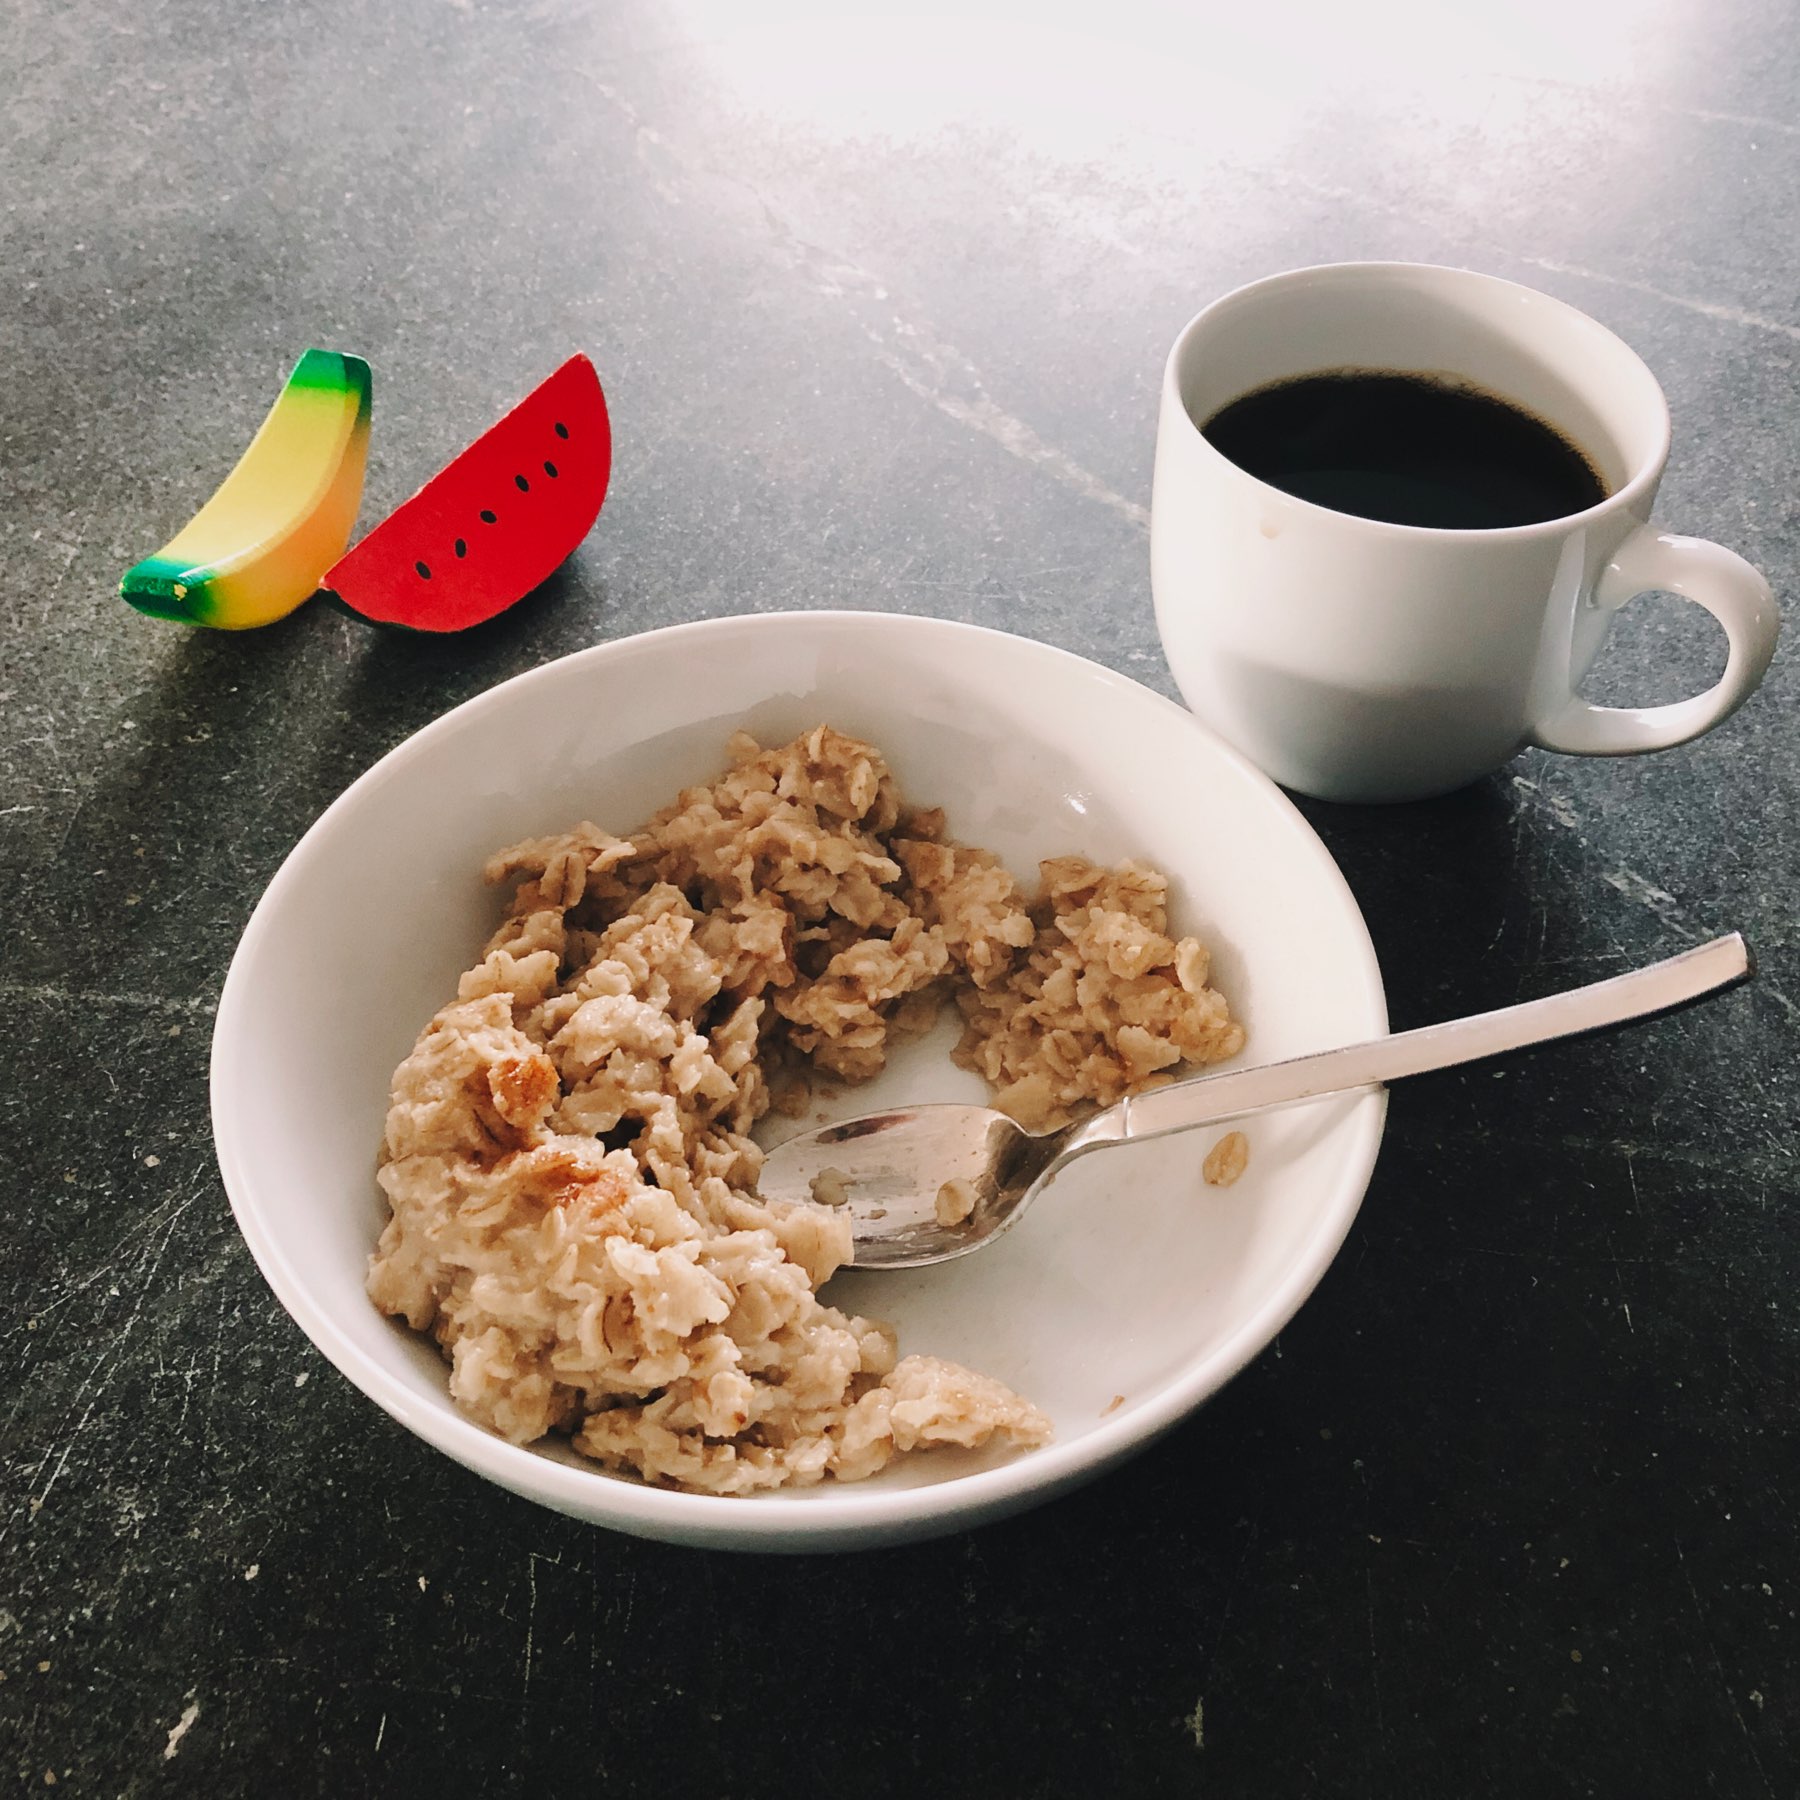 Oatmeal and coffee, served with toy banana and watermelon.